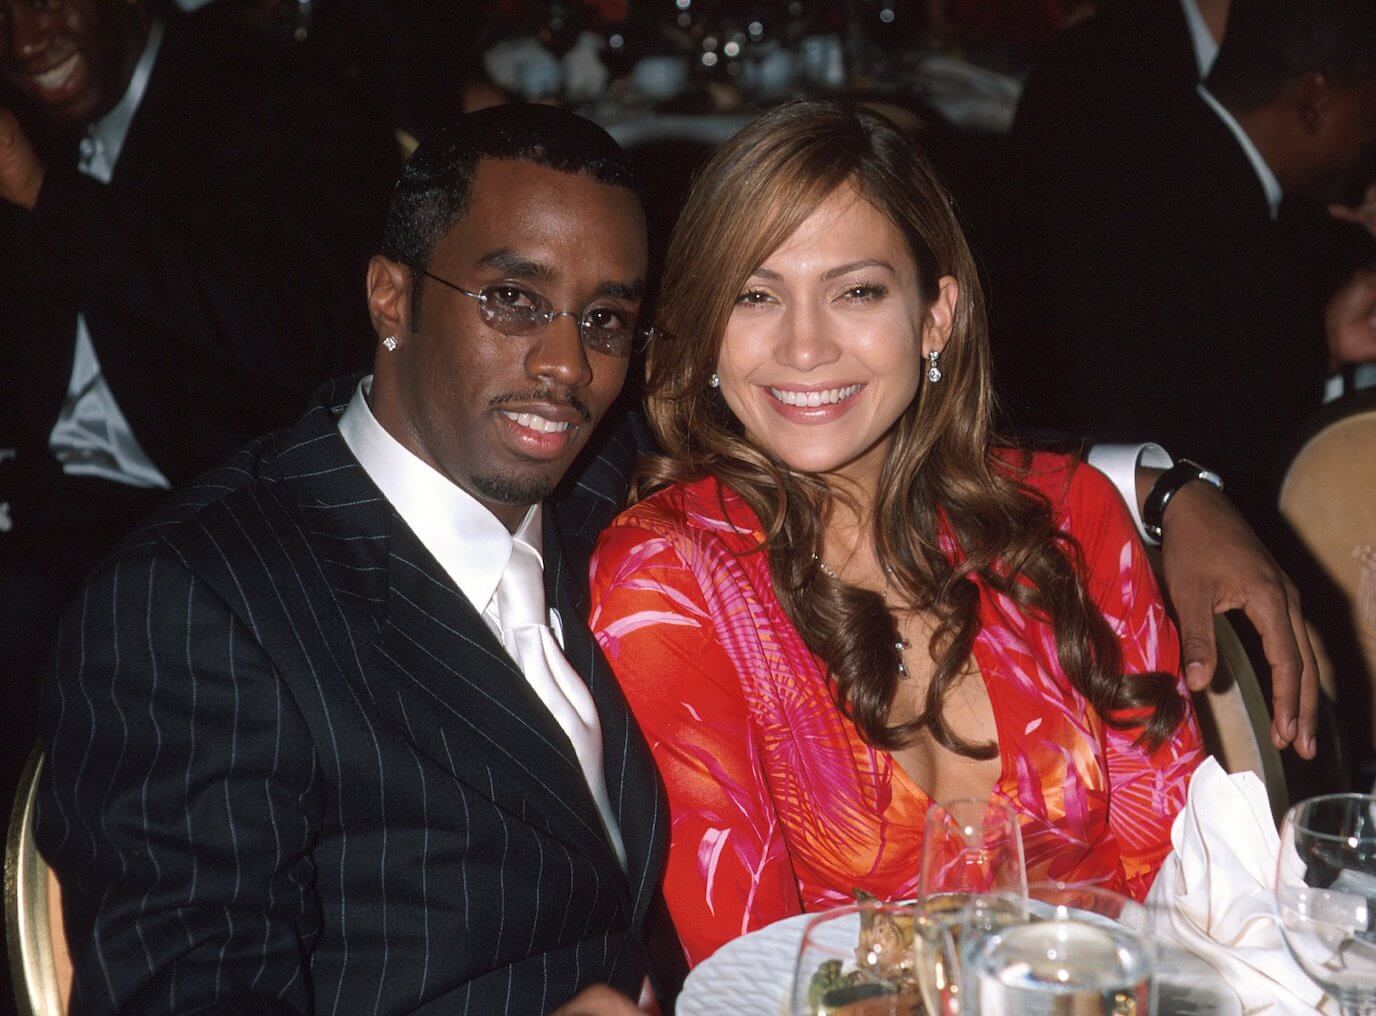 Sean "P. Diddy" Combs and Jennifer Lopez at the Grammy Awards